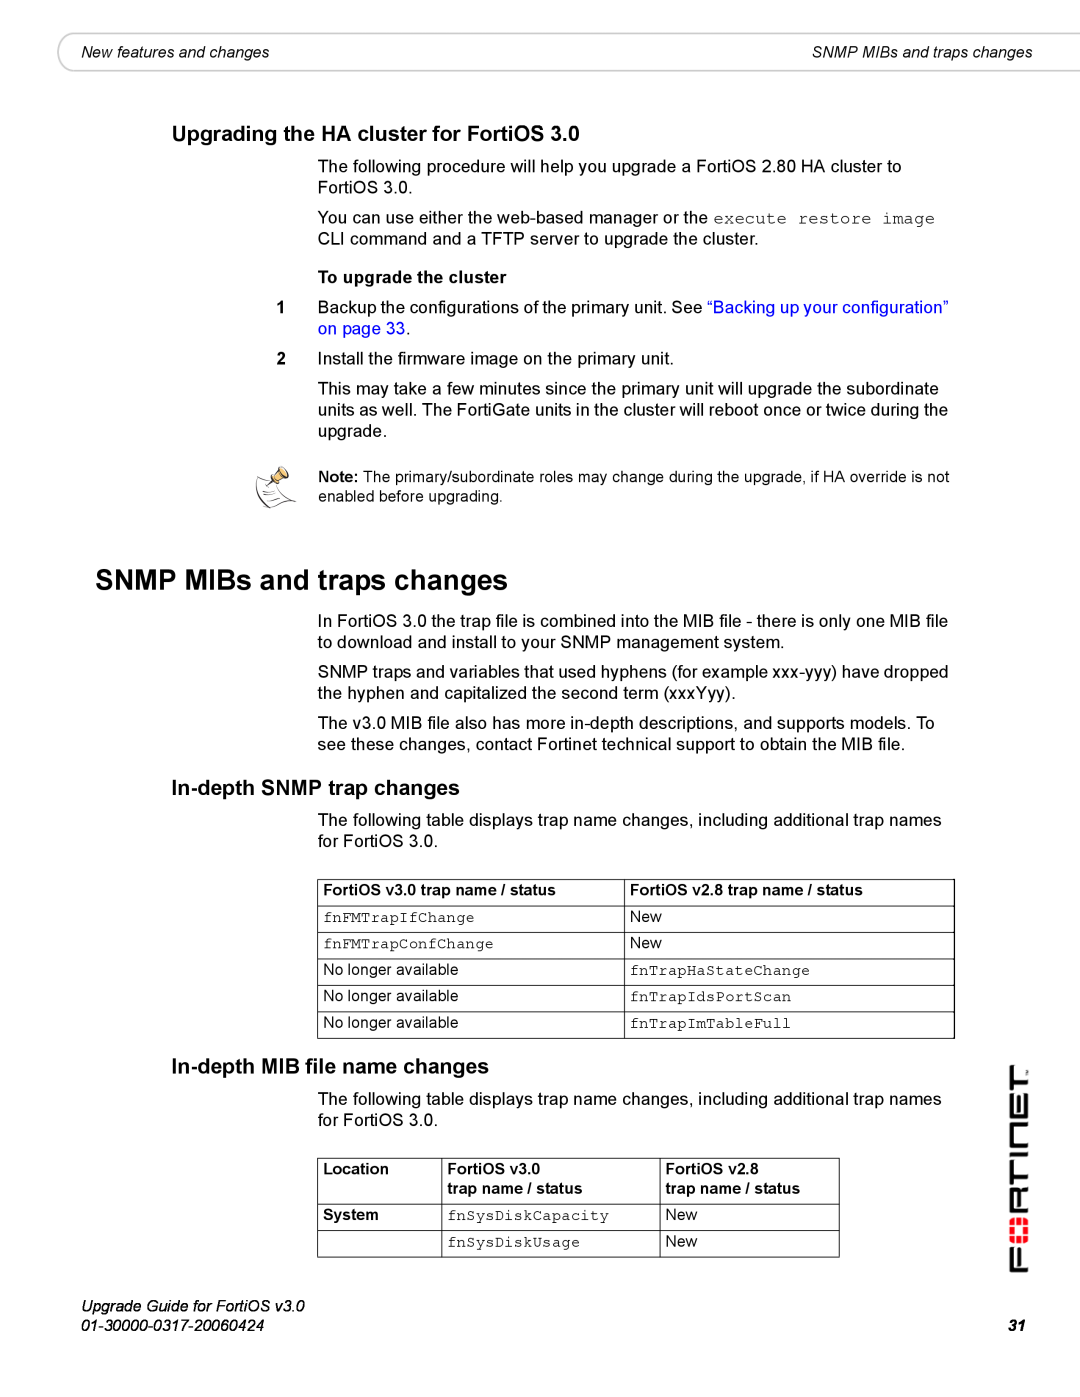 Fortinet FortiOS 3.0 manual SNMP MIBs and traps changes, Upgrading the HA cluster for FortiOS, In-depth SNMP trap changes 